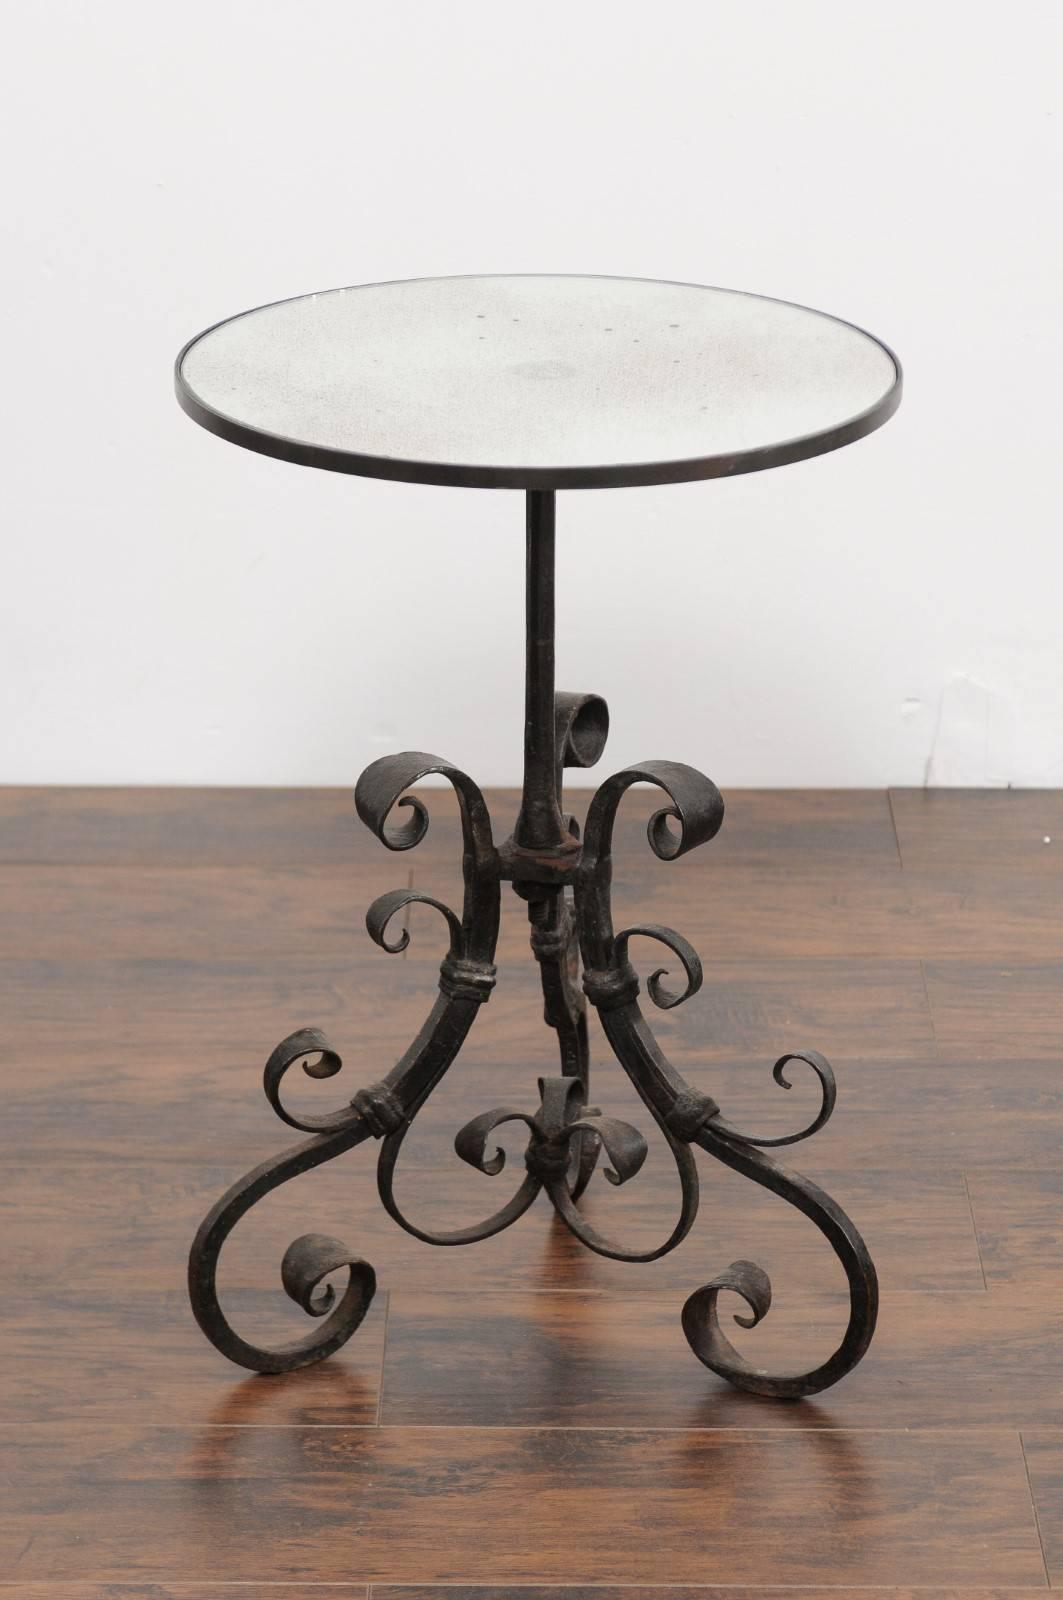 An Italian wrought iron pedestal side table from the second half of the 19th century, with new custom mirrored top and scrolled motifs. This Italian side table features a circular mirrored top with a lovely antiqued finish, supported by a 19th